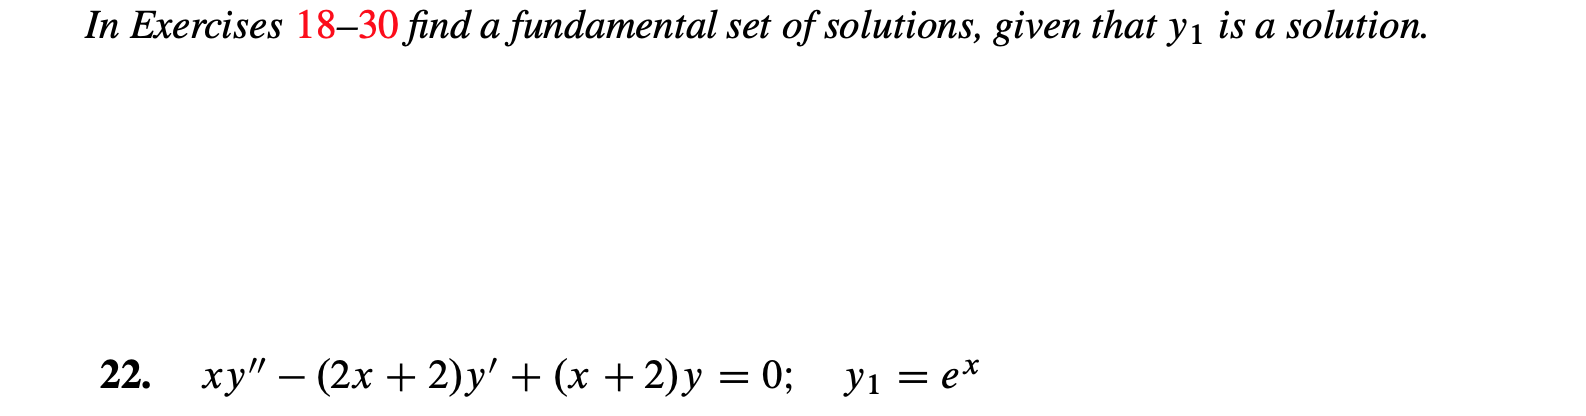 In Exercises 18-30 find a fundamental set of solutions, given that y1 is a solution.
ху" — (2х + 2)y' + (х + 2)у 3 03;
22.
У1 — ех
